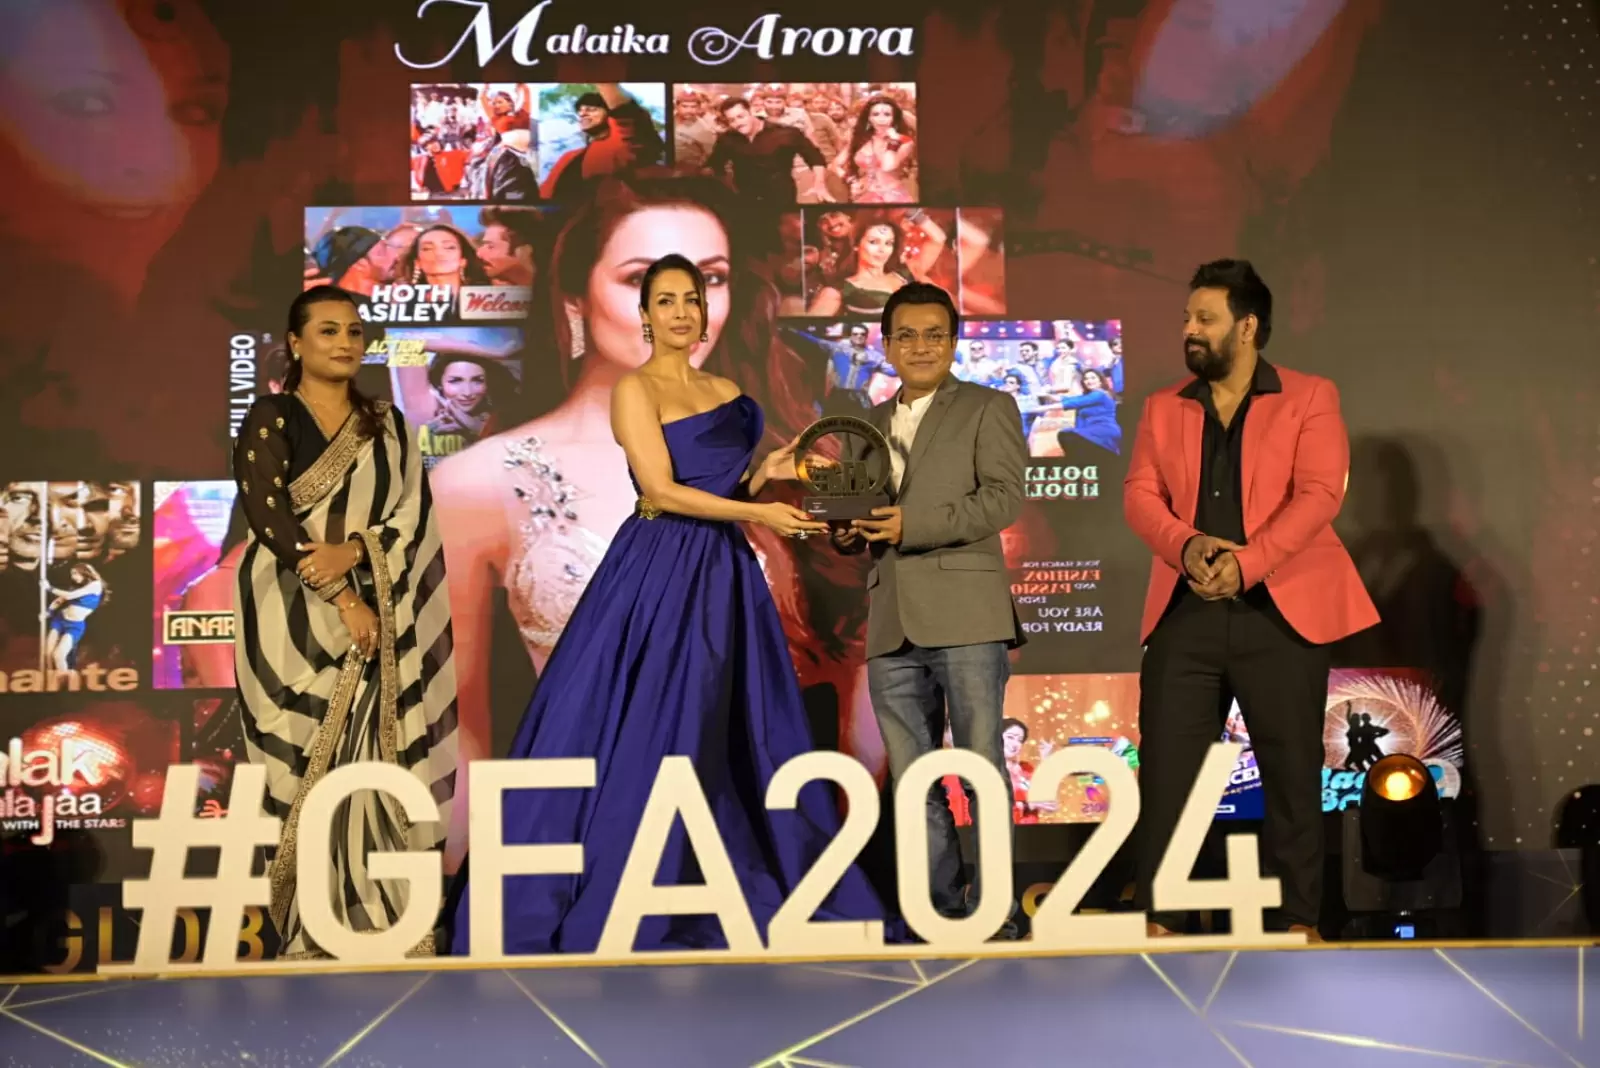 Malaika Arora Shines at the Glitzy 'Global Fame Awards 2024' Hosted by Vkonnect Events & Entertainment